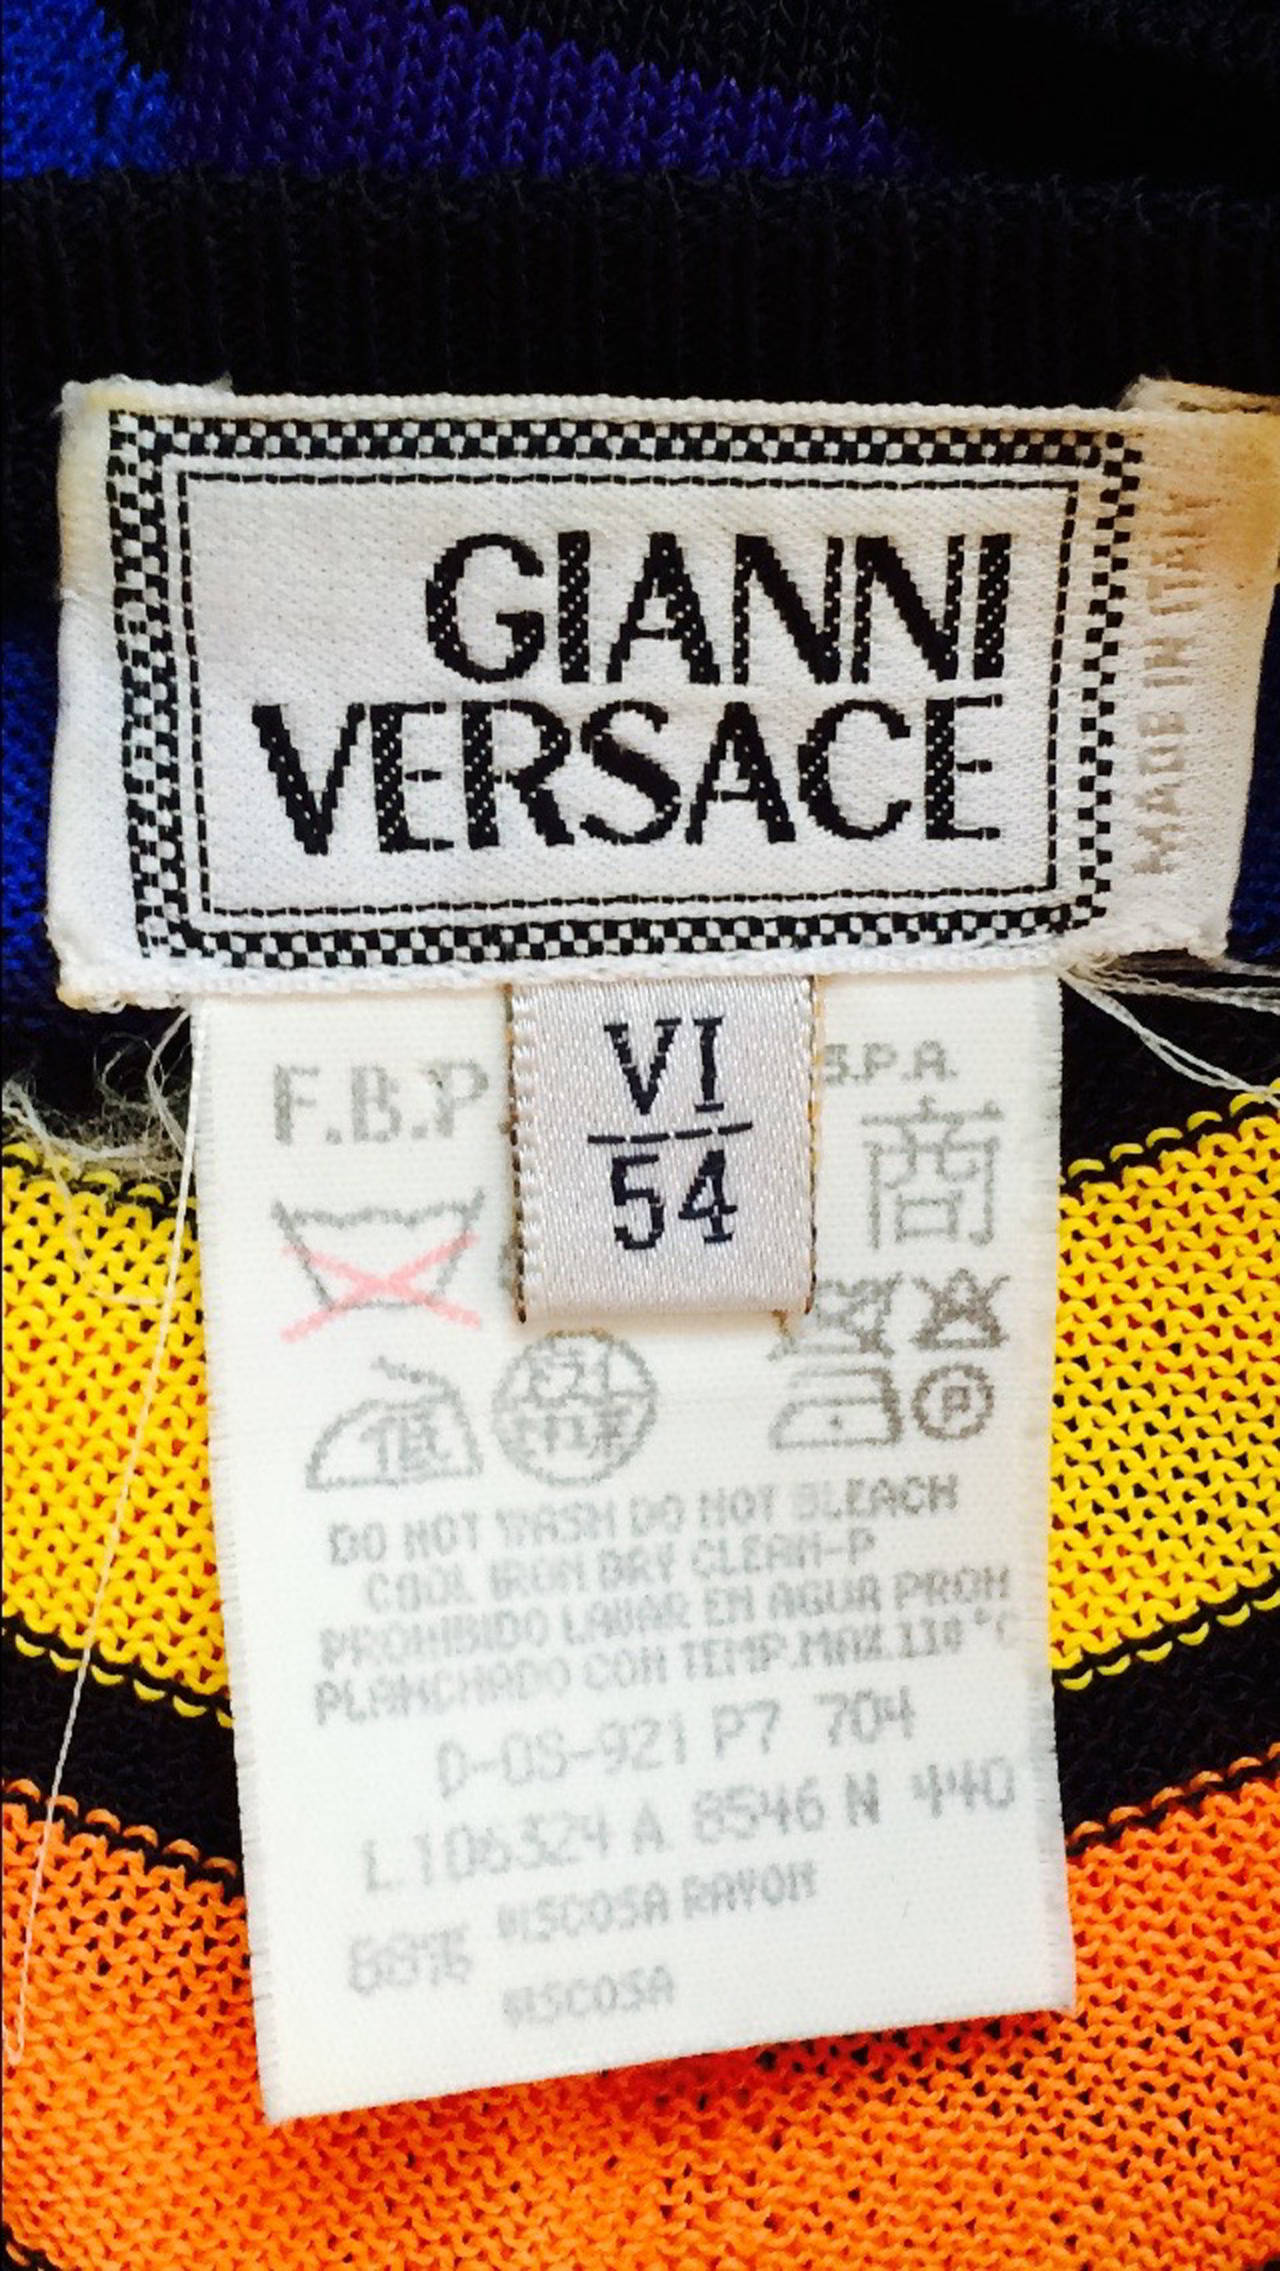 A fine gentleman's Gianni Versace knit tee shirt top. Authentic silky zig-zag knit fabric item pulls over head with no closures. Pristine appears unworn.